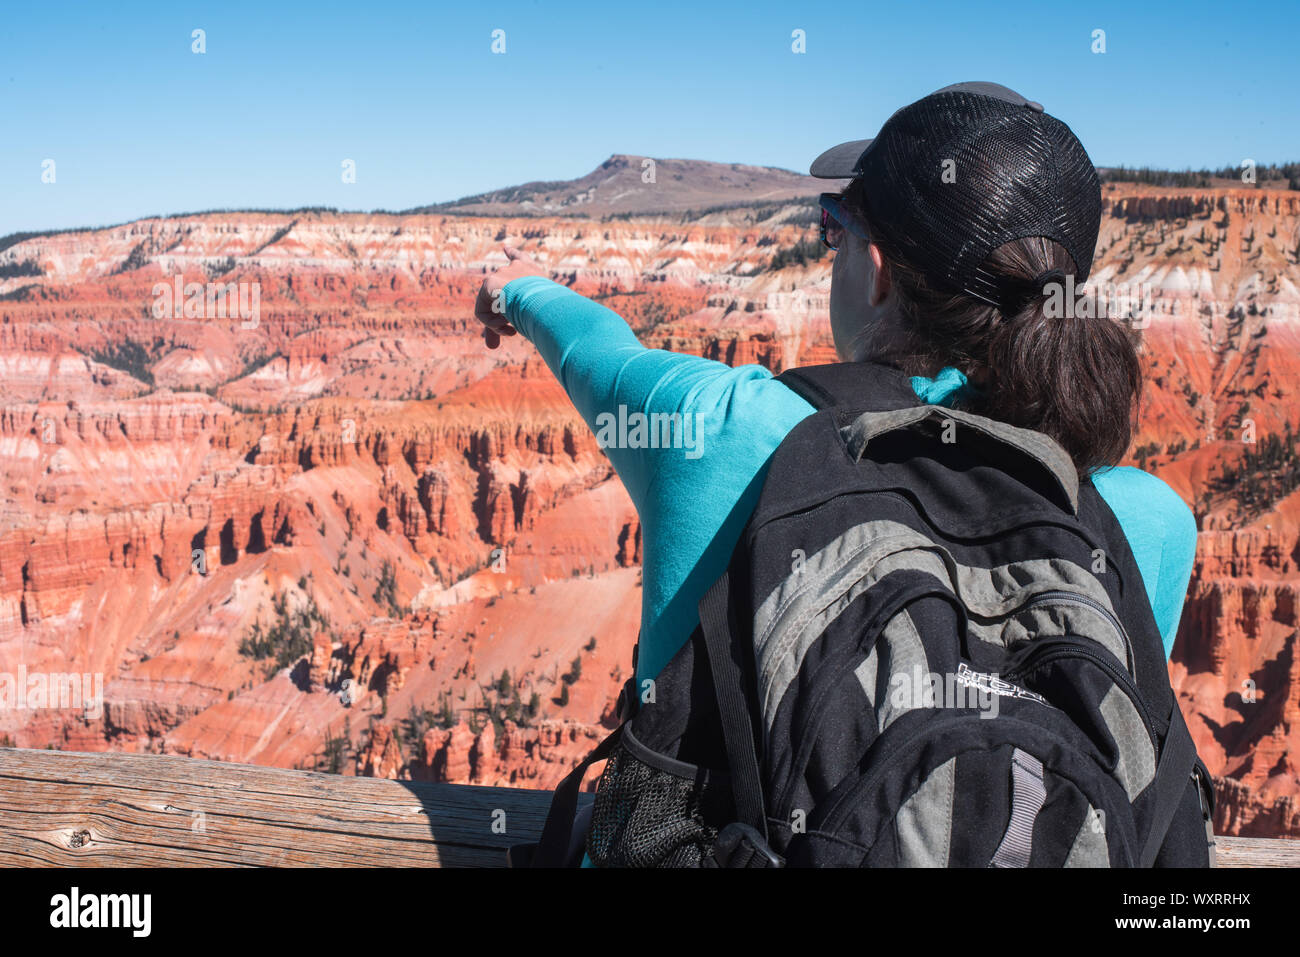 Cedar Breaks, UT/09-27-2016: People view the canyon rock formations in their visit to Cedar Breaks National Monument, Utah, USA Stock Photo